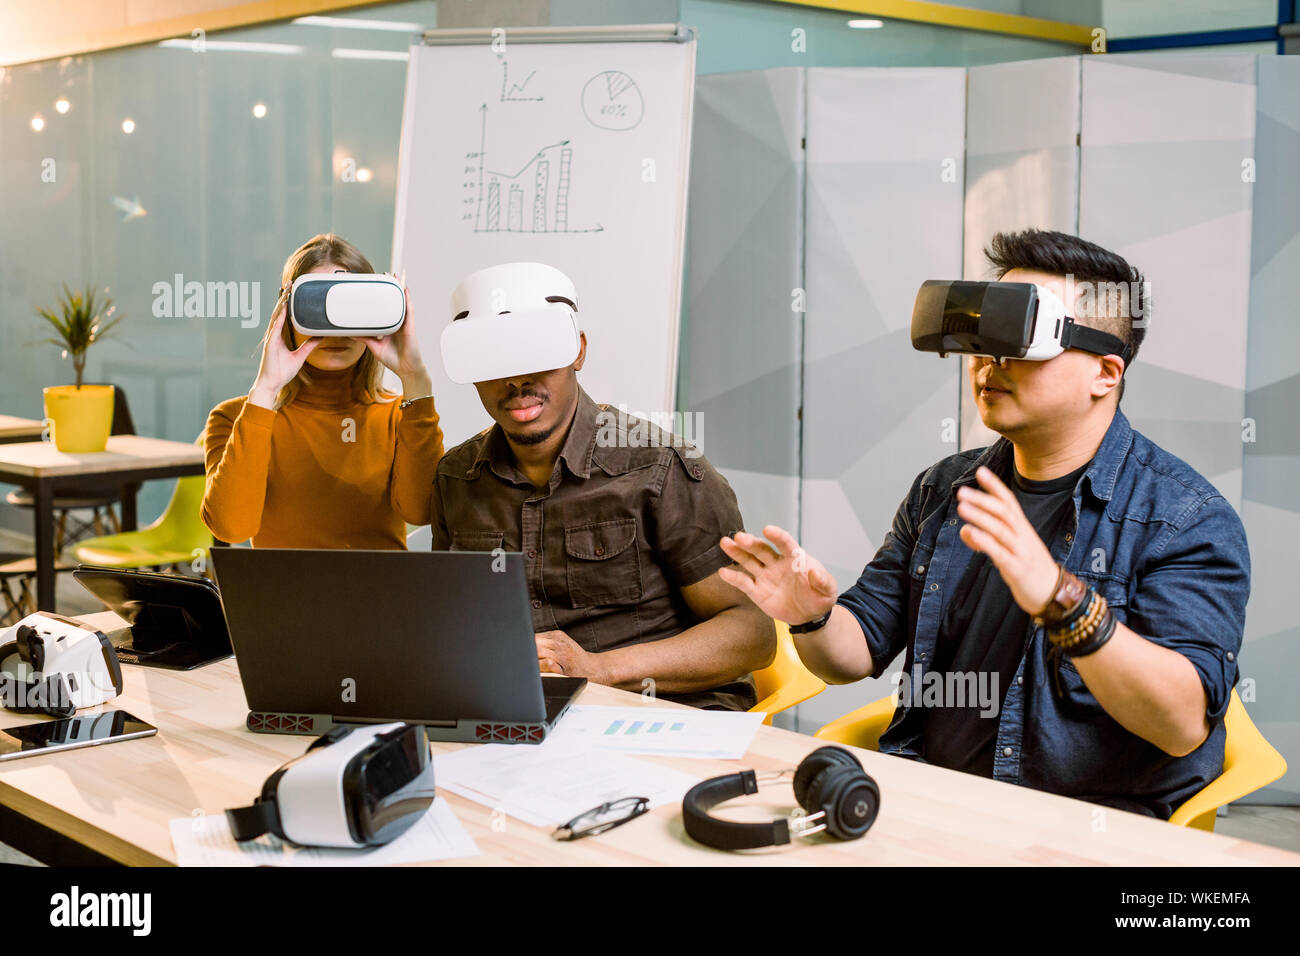 Young group of multiethnical people having fun with new technology vr headset. Caucasian girl, African and Chinese men sitting at the desk and trying Stock Photo